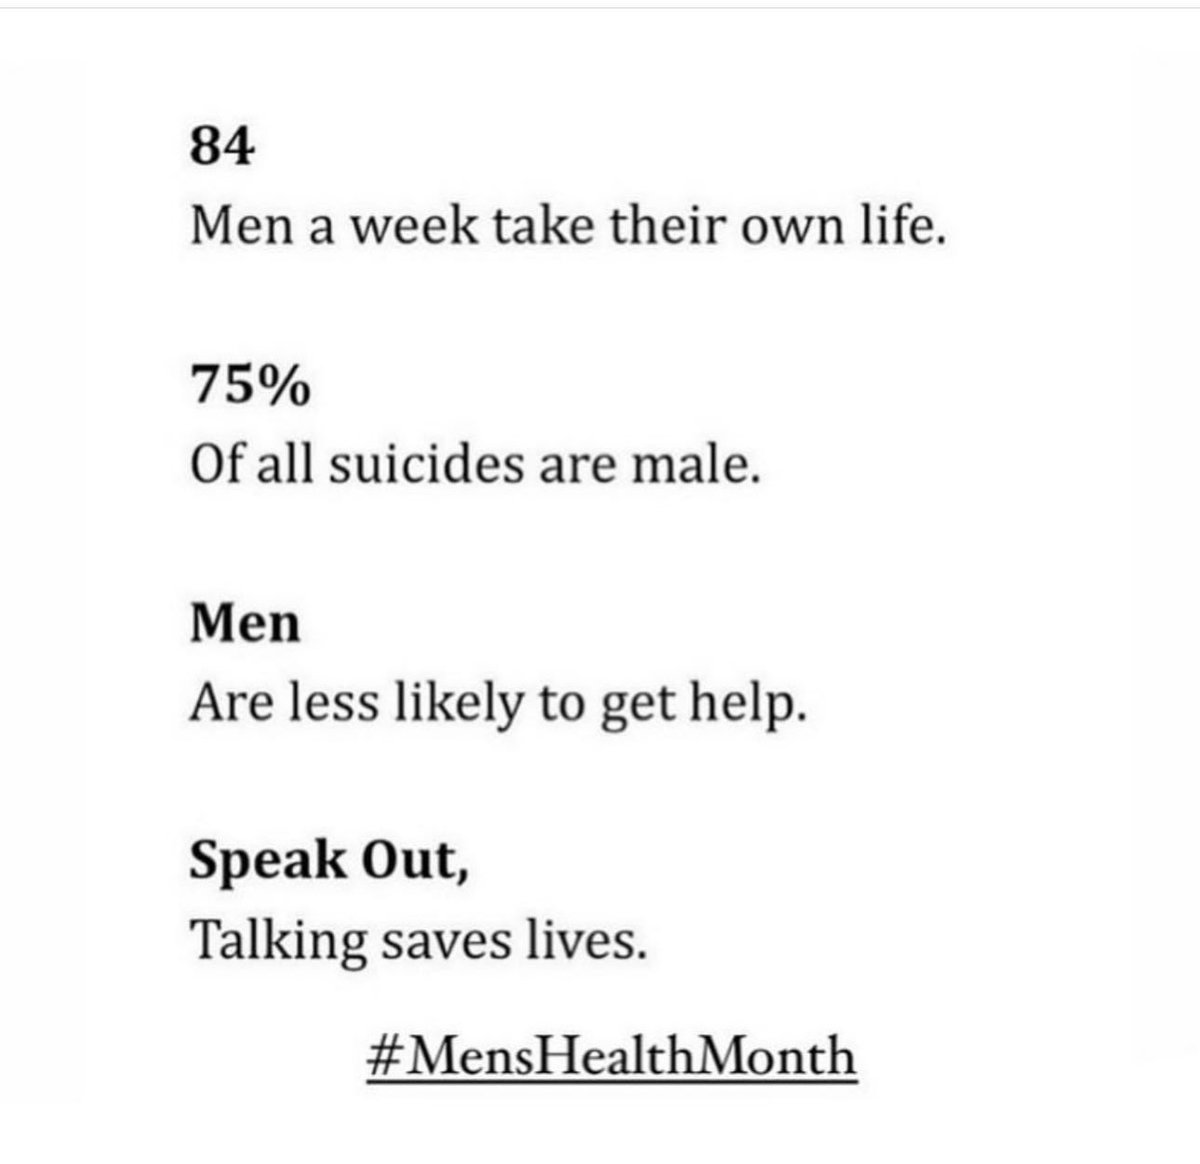 It’s never too late to let someone know that you love them and you’re happy they’re still with us. #MensHealthMonth